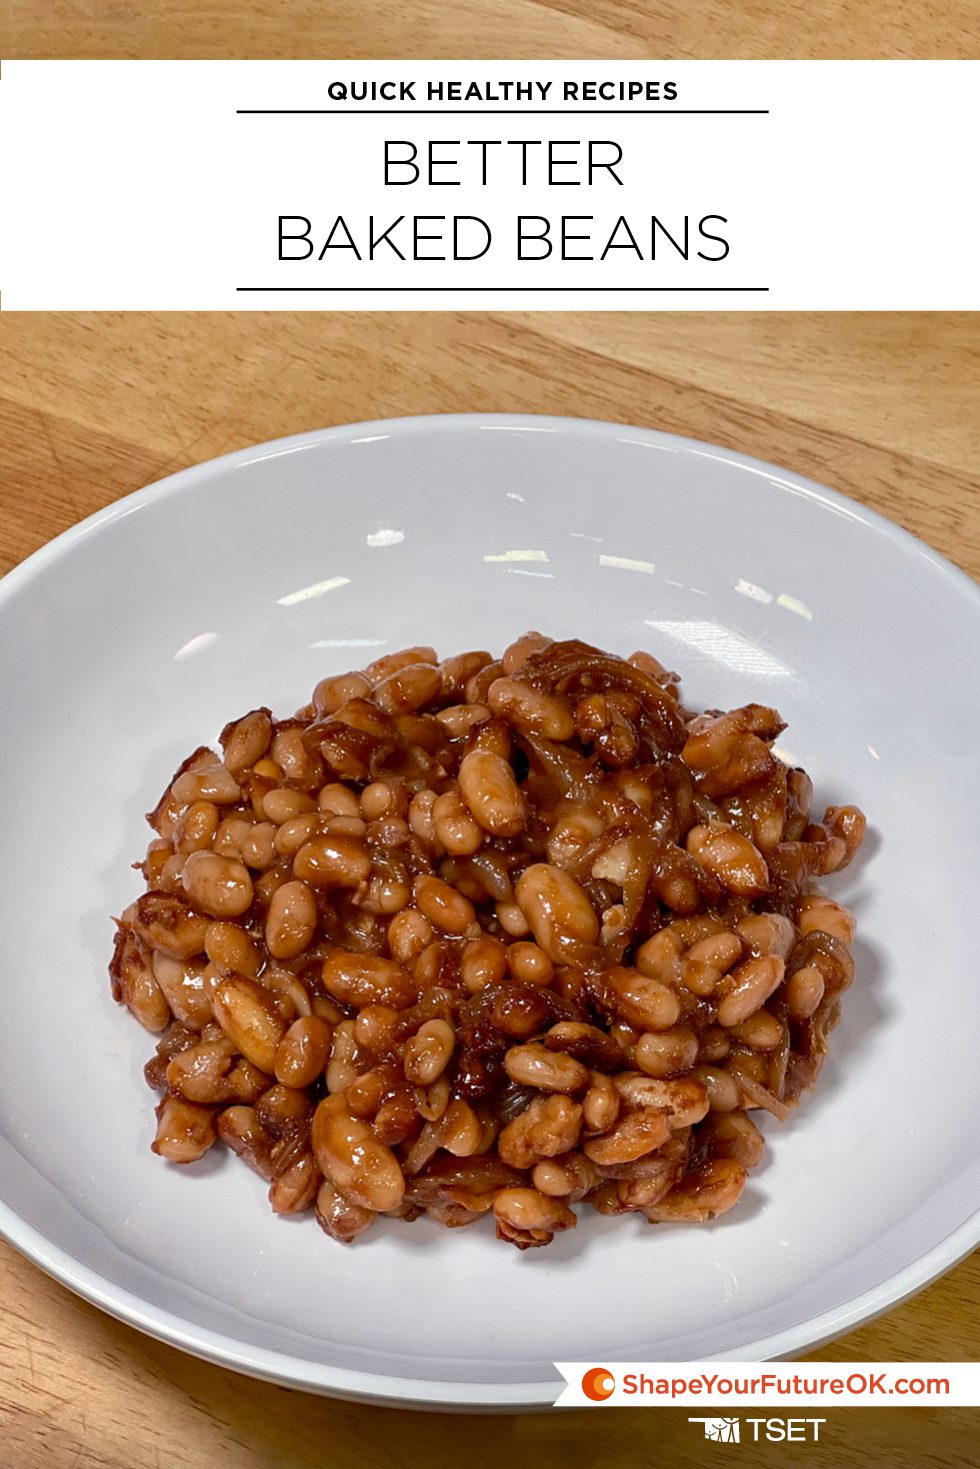 Better Baked Beans quick healthy recipe